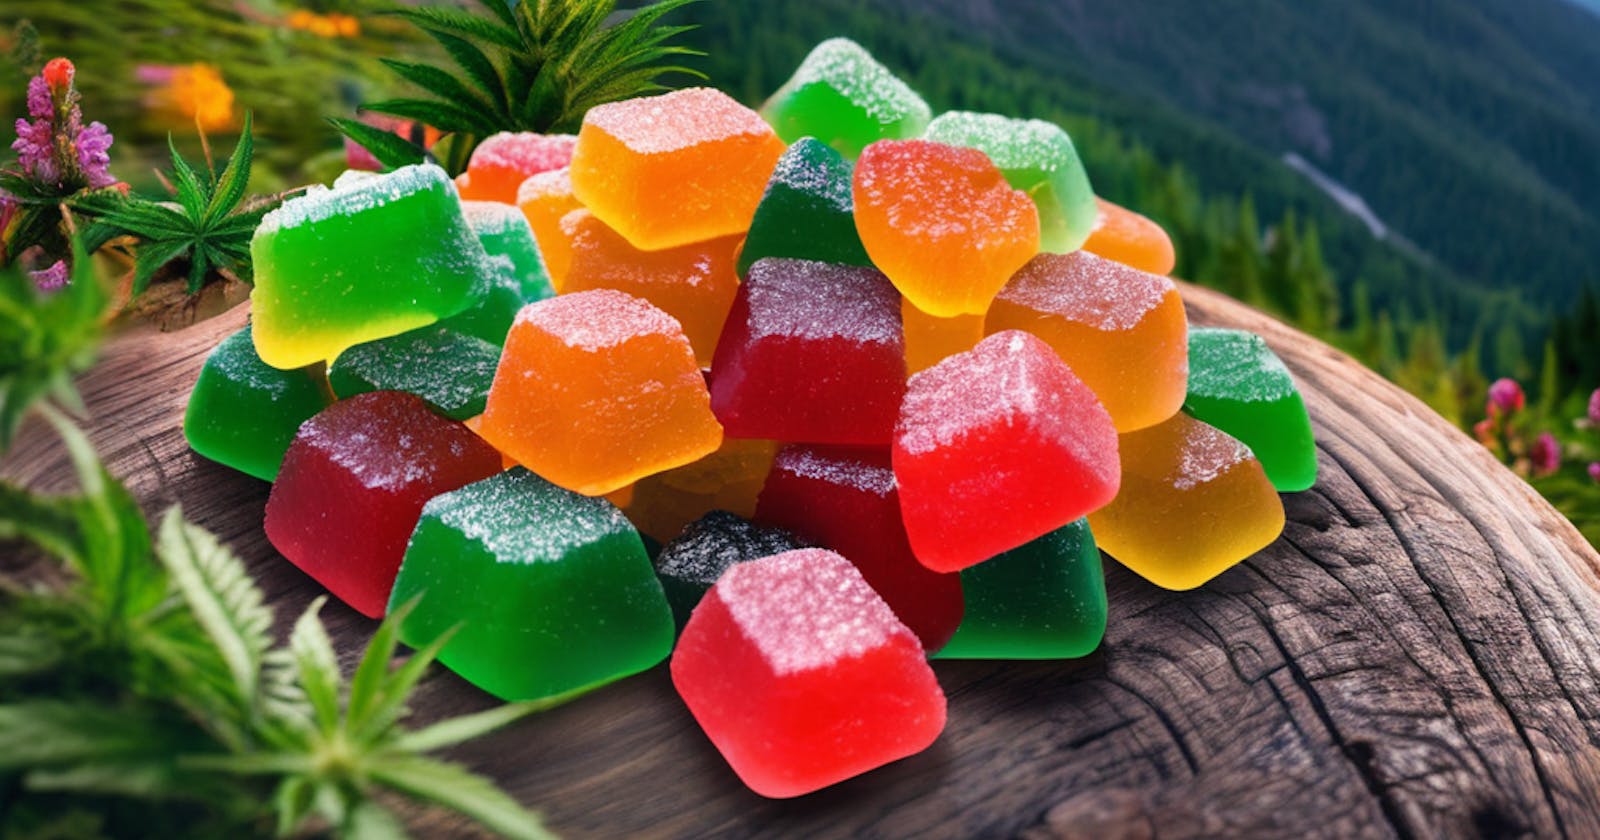 The Science Behind Calm Crest CBD Gummies: How CBD Works in the Body and Brain